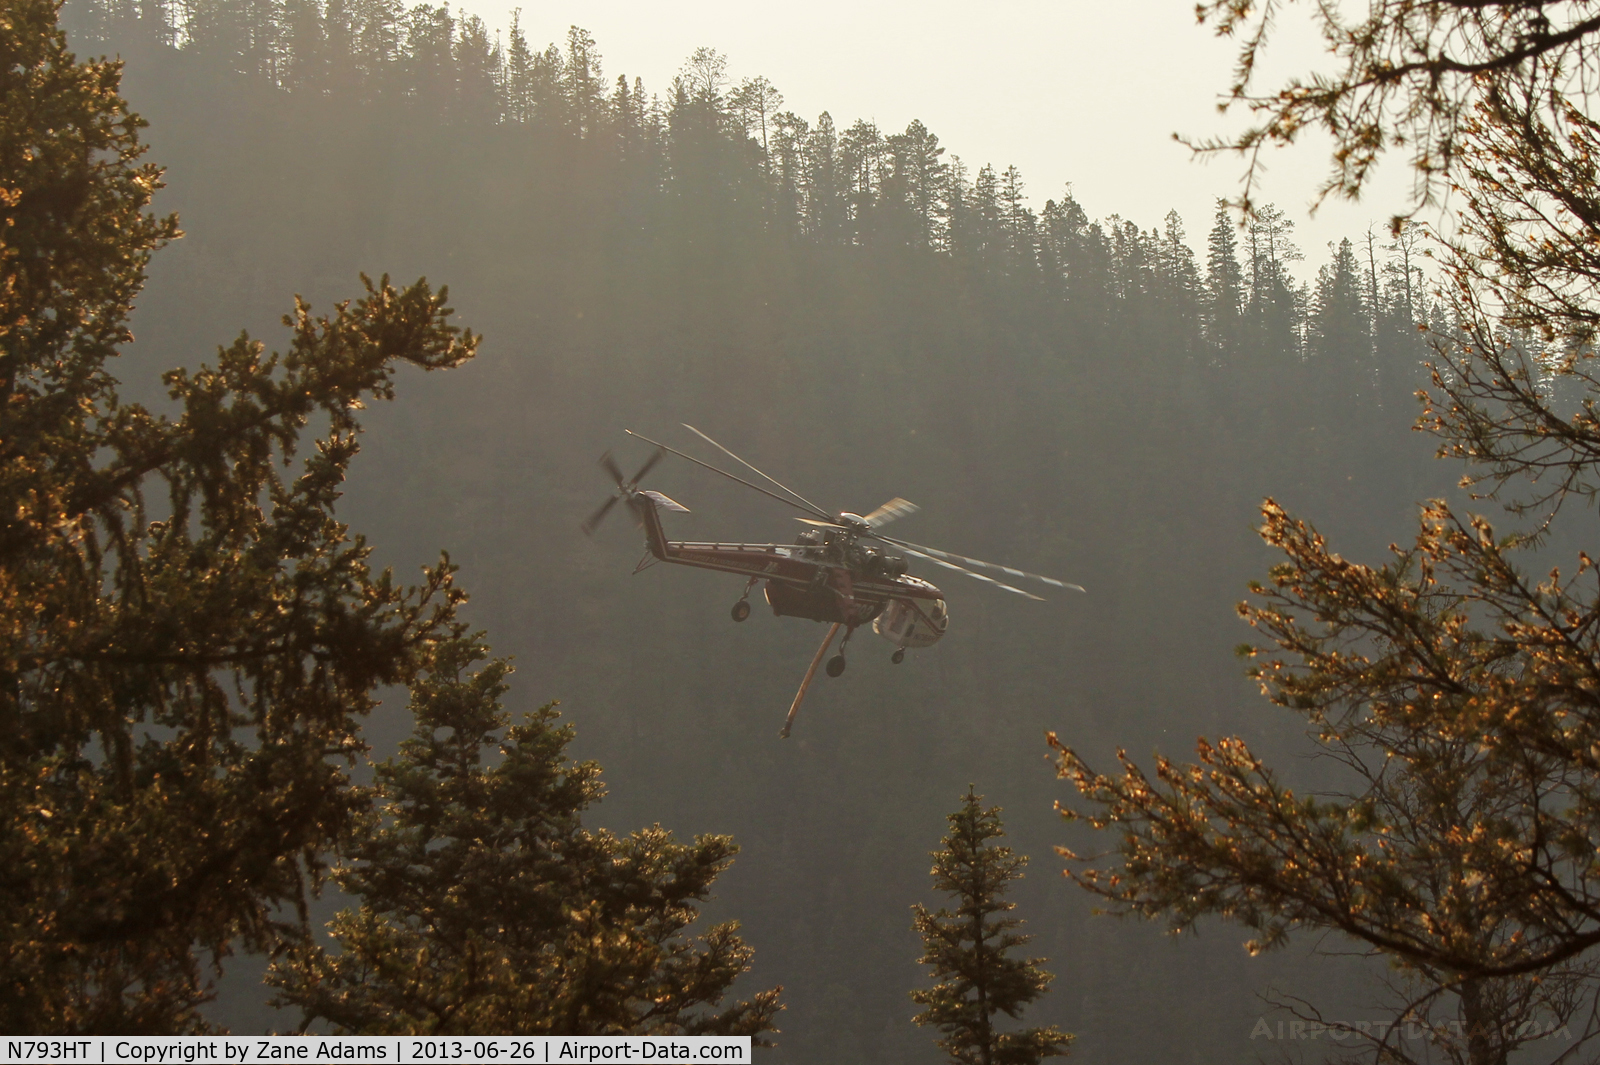 N793HT, Sikorsky S64 C/N 67-18427, Working the Jaroso Fire near Cowles, New Mexico